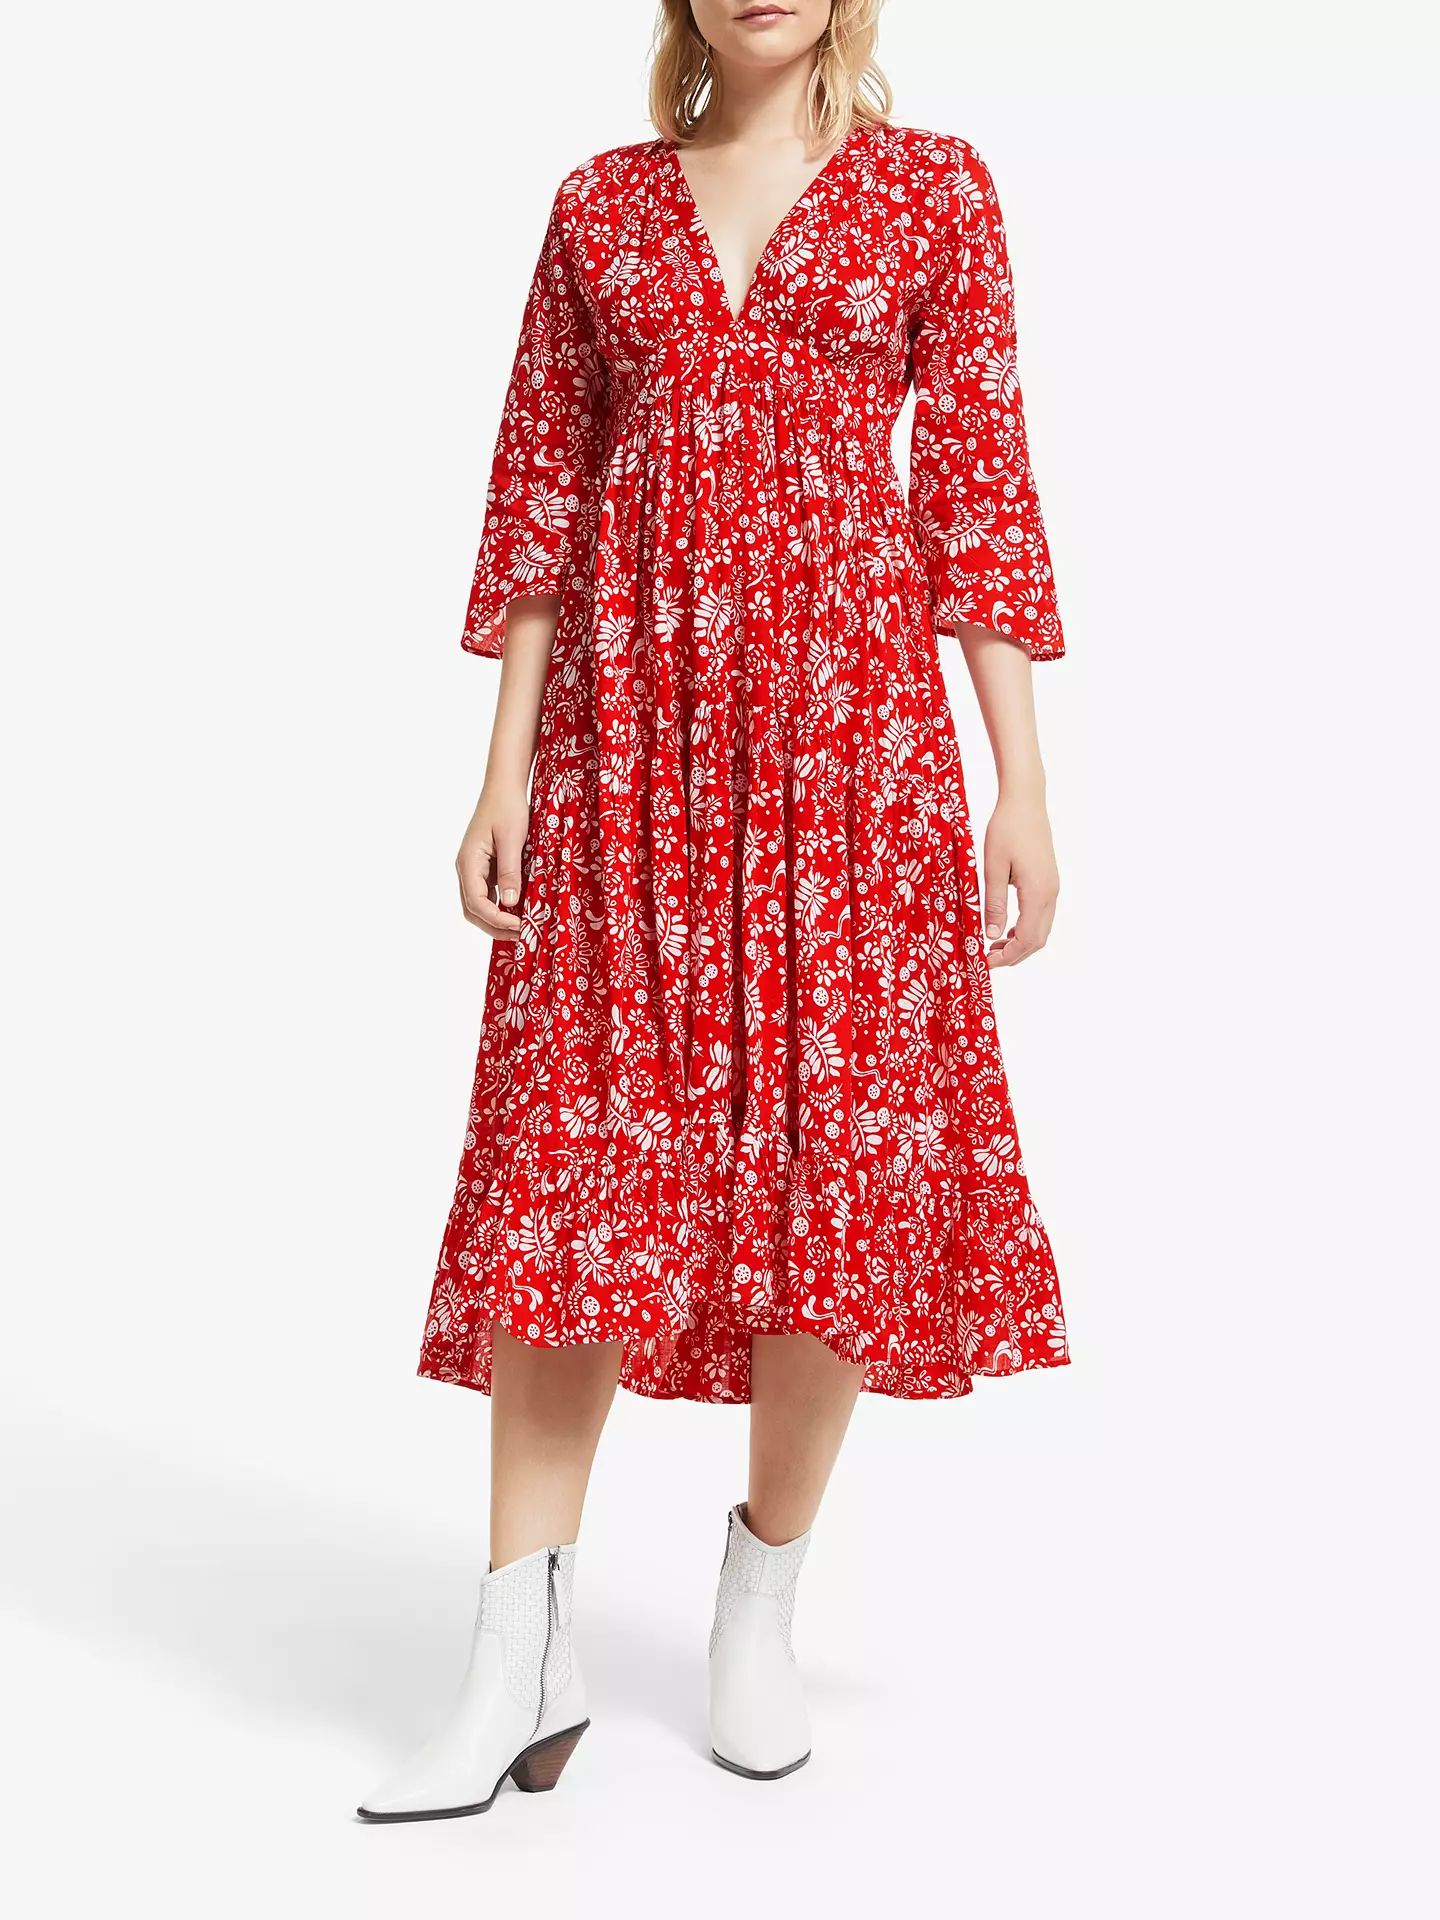 AND/OR La Galeria Elefante Mexicana Fern Print Tiered Maxi Dress, Red/Ivory | John Lewis UK